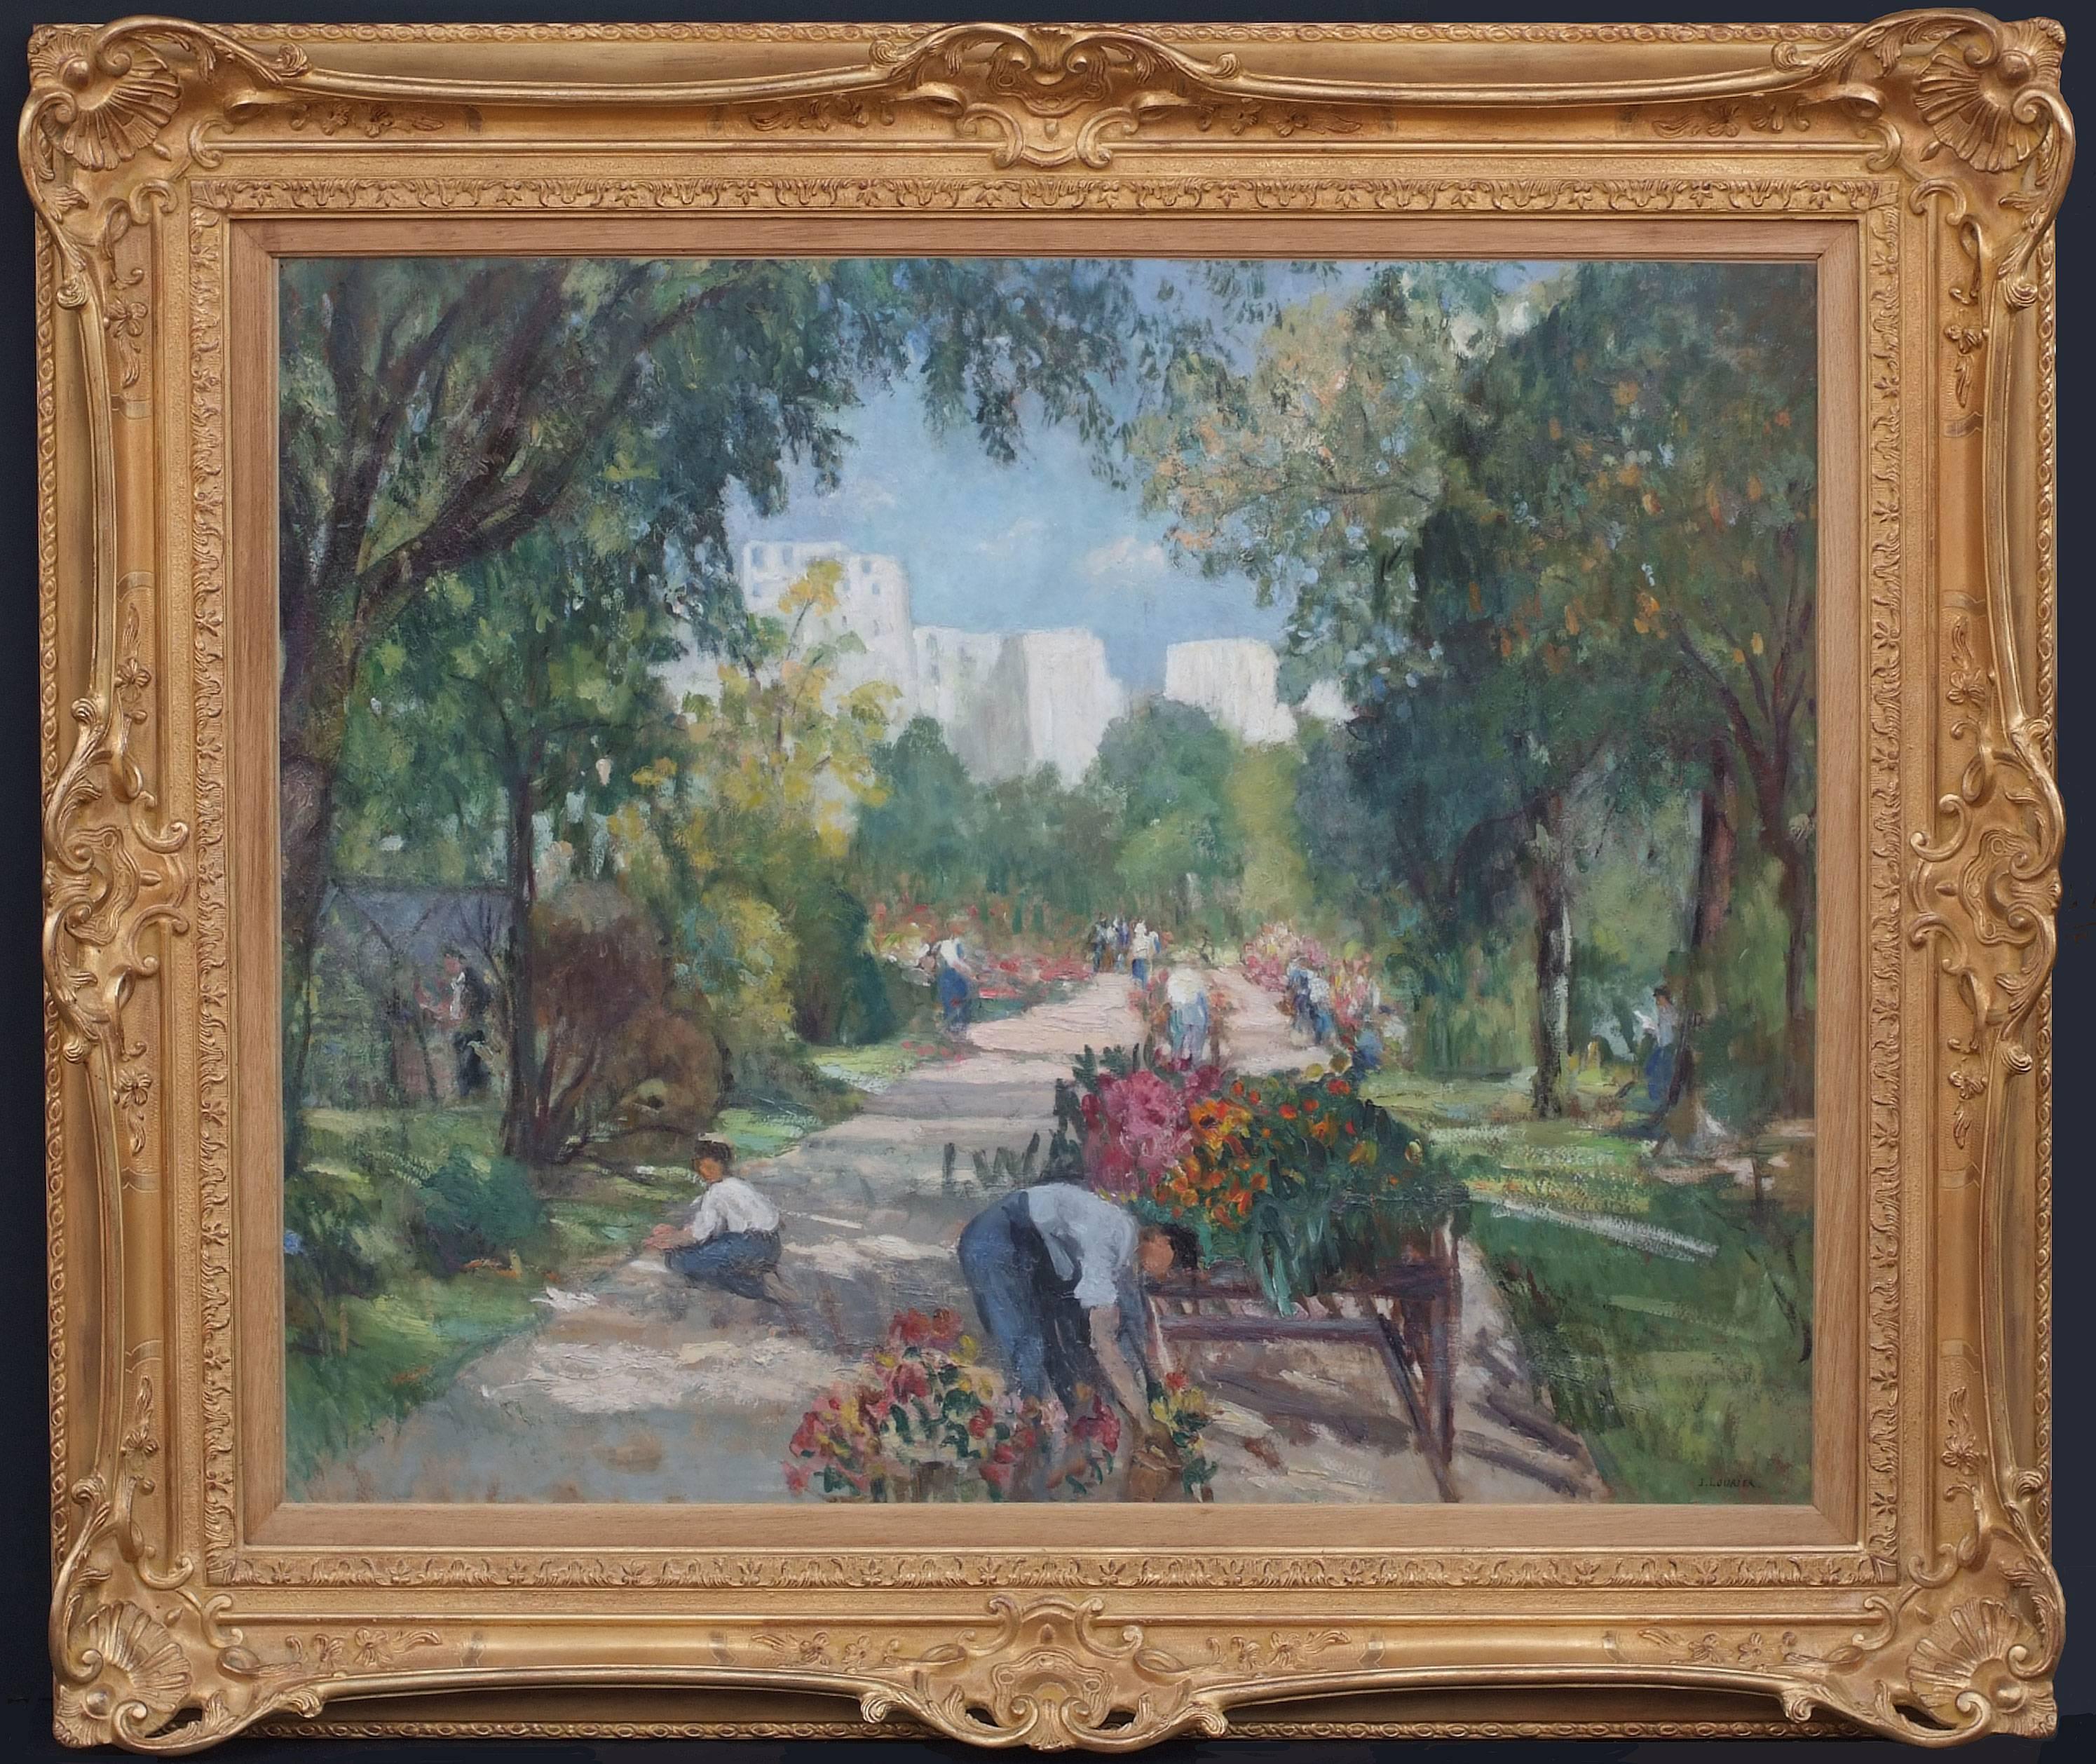 LOURIER-DREYFUS Jeanne Figurative Painting - Painting Early 20th Century Landscape Garden and Characters